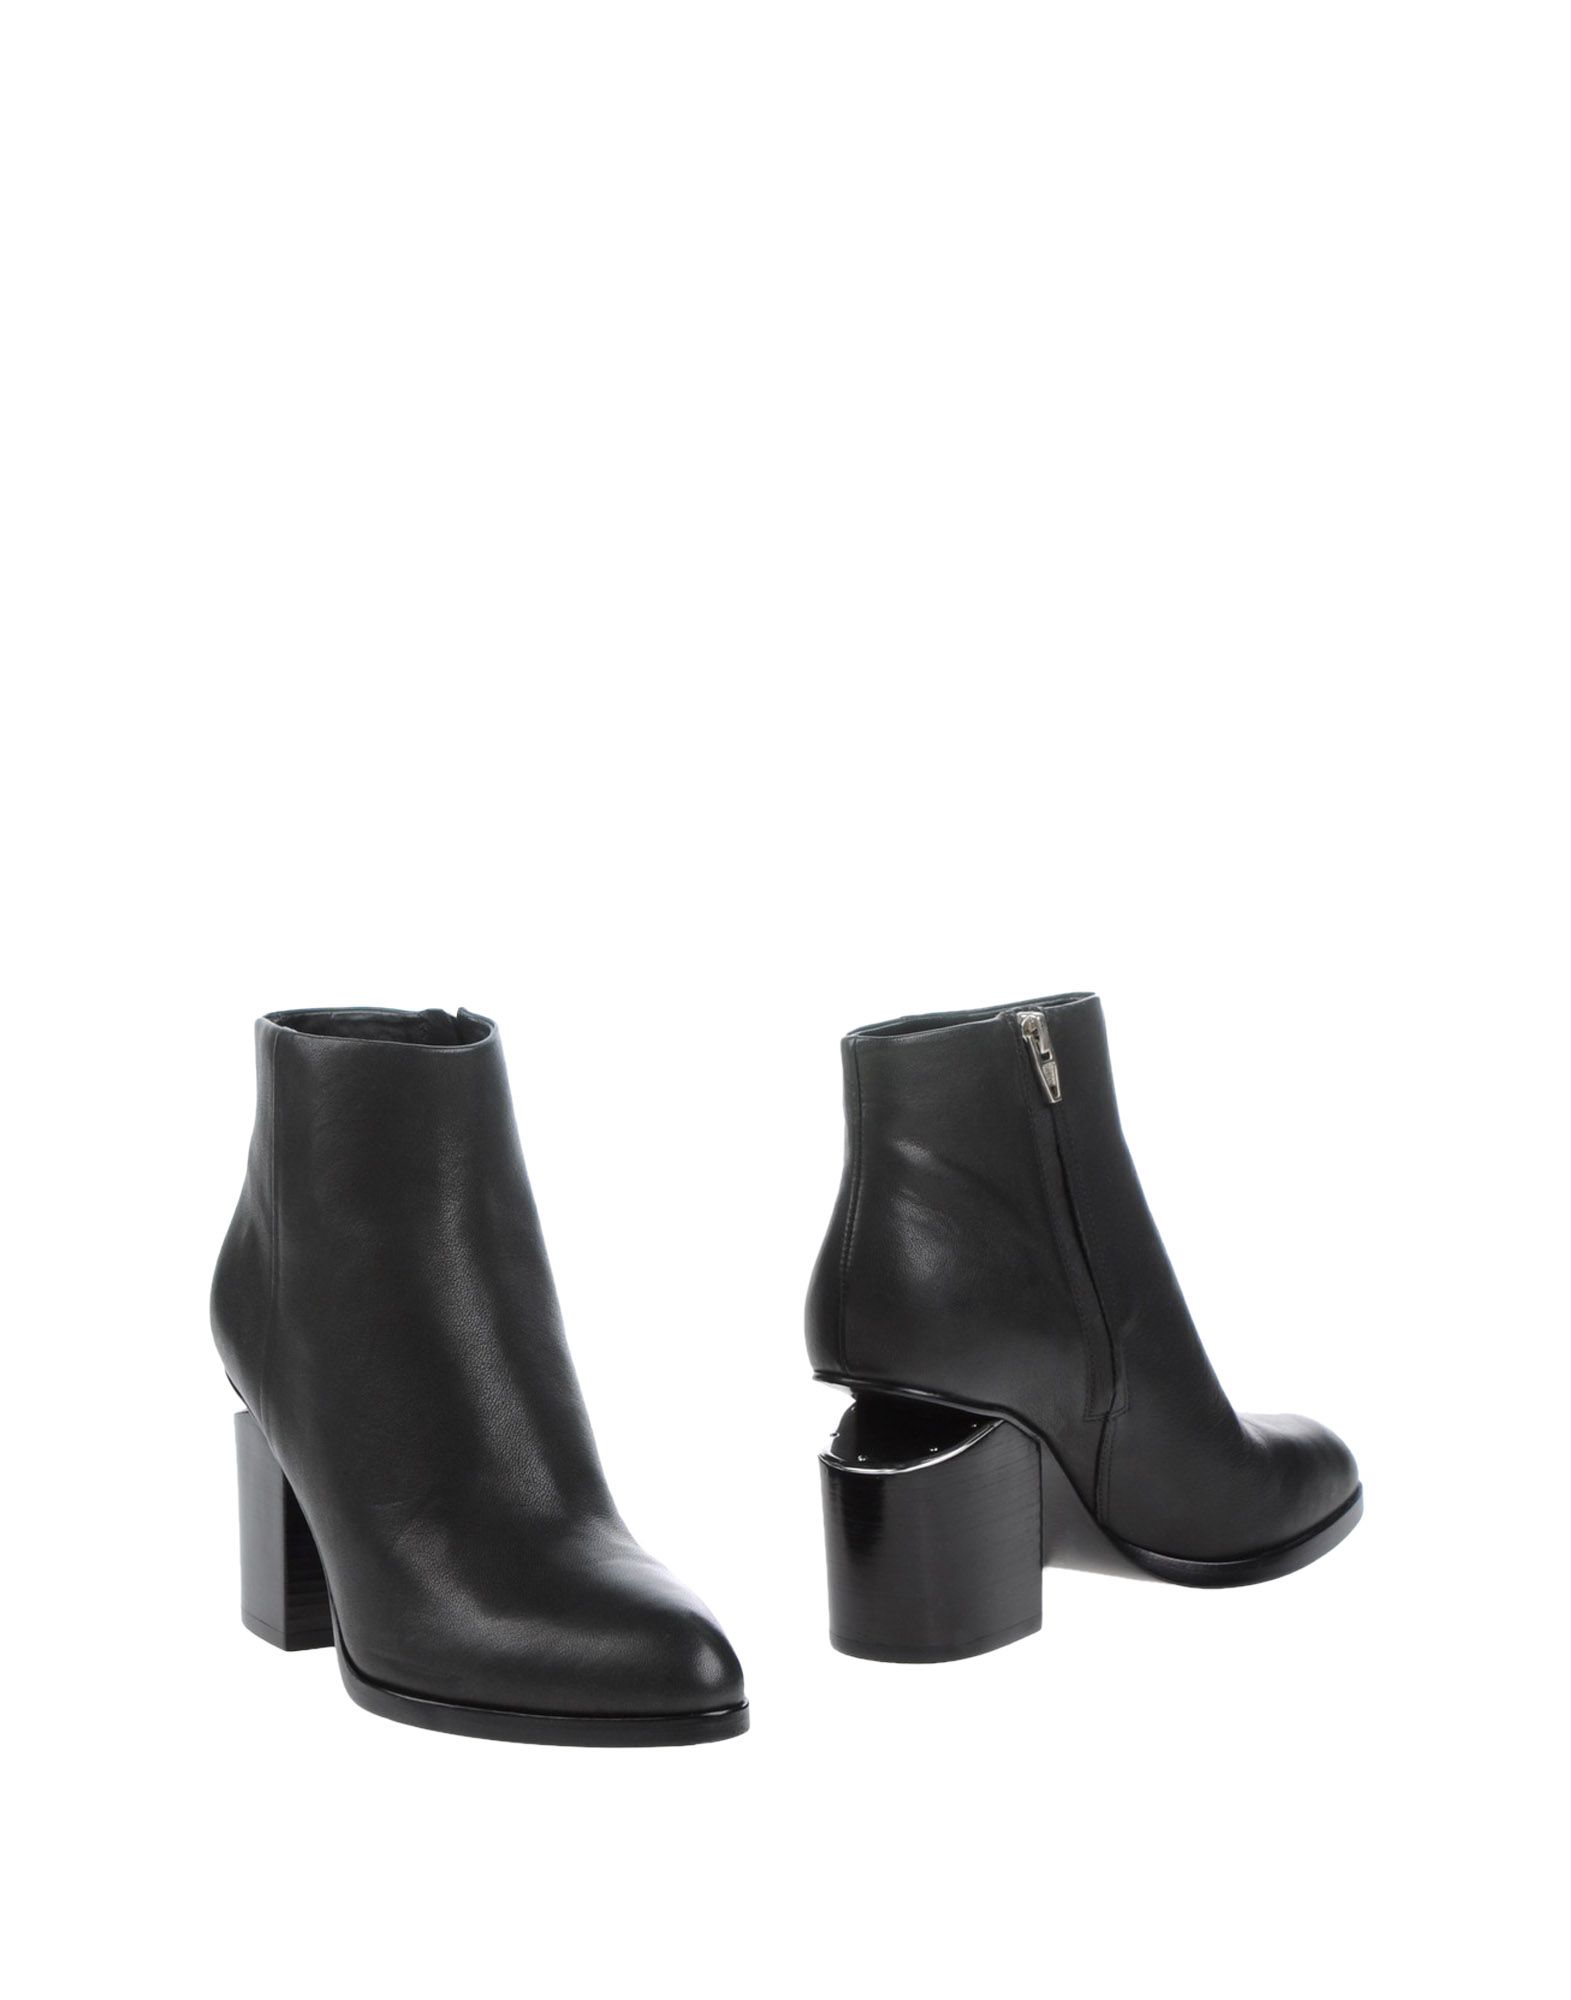 ALEXANDER WANG Ankle boot,11214221LH 4